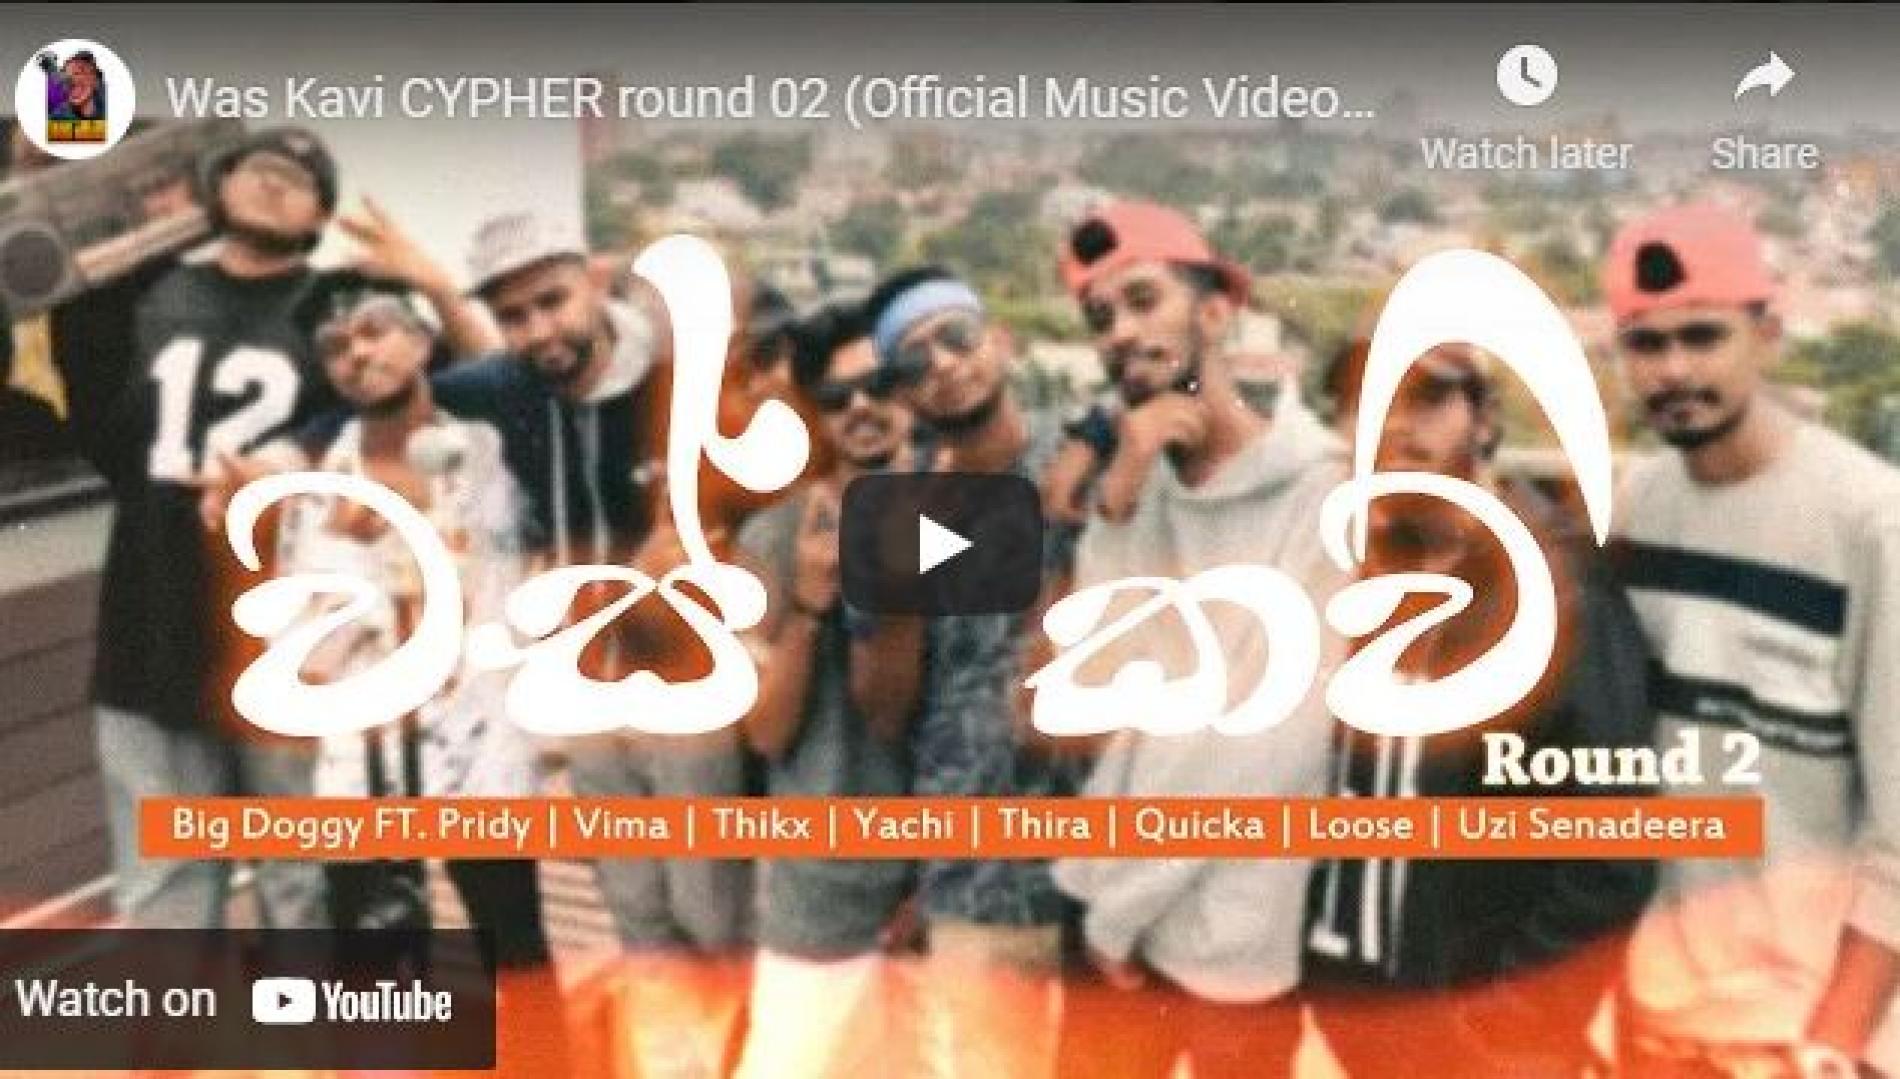 New Music : Was Kavi CYPHER round 02 (Official Music Video) Big Doggy feat Various Artists